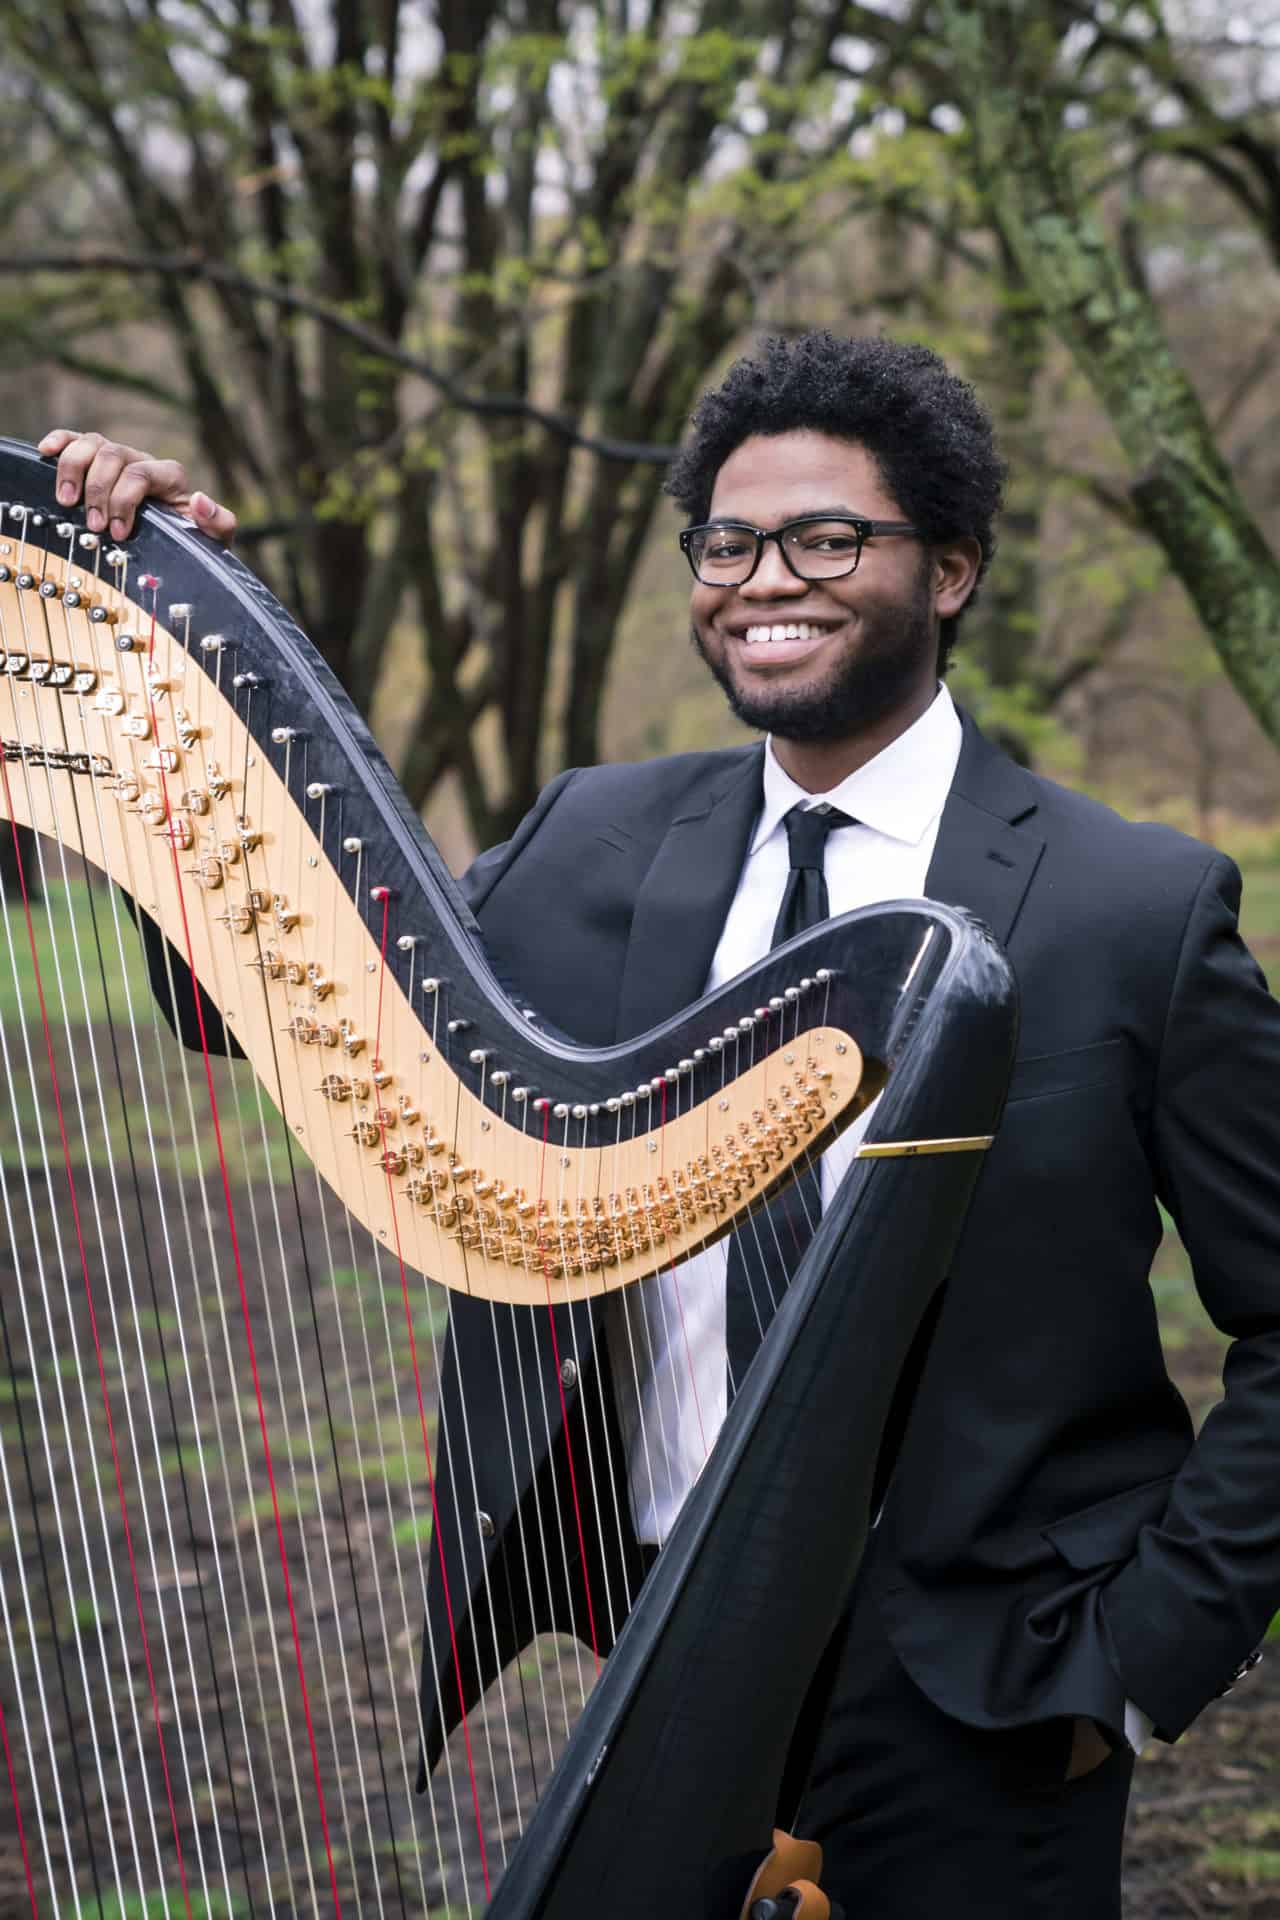 Acclaimed harpist Charles Overton will perform in tribute to Ann Hobson Pilot, longtime harpist with the Boston Symphony Orchestra. Press photo courtesy of the BSO